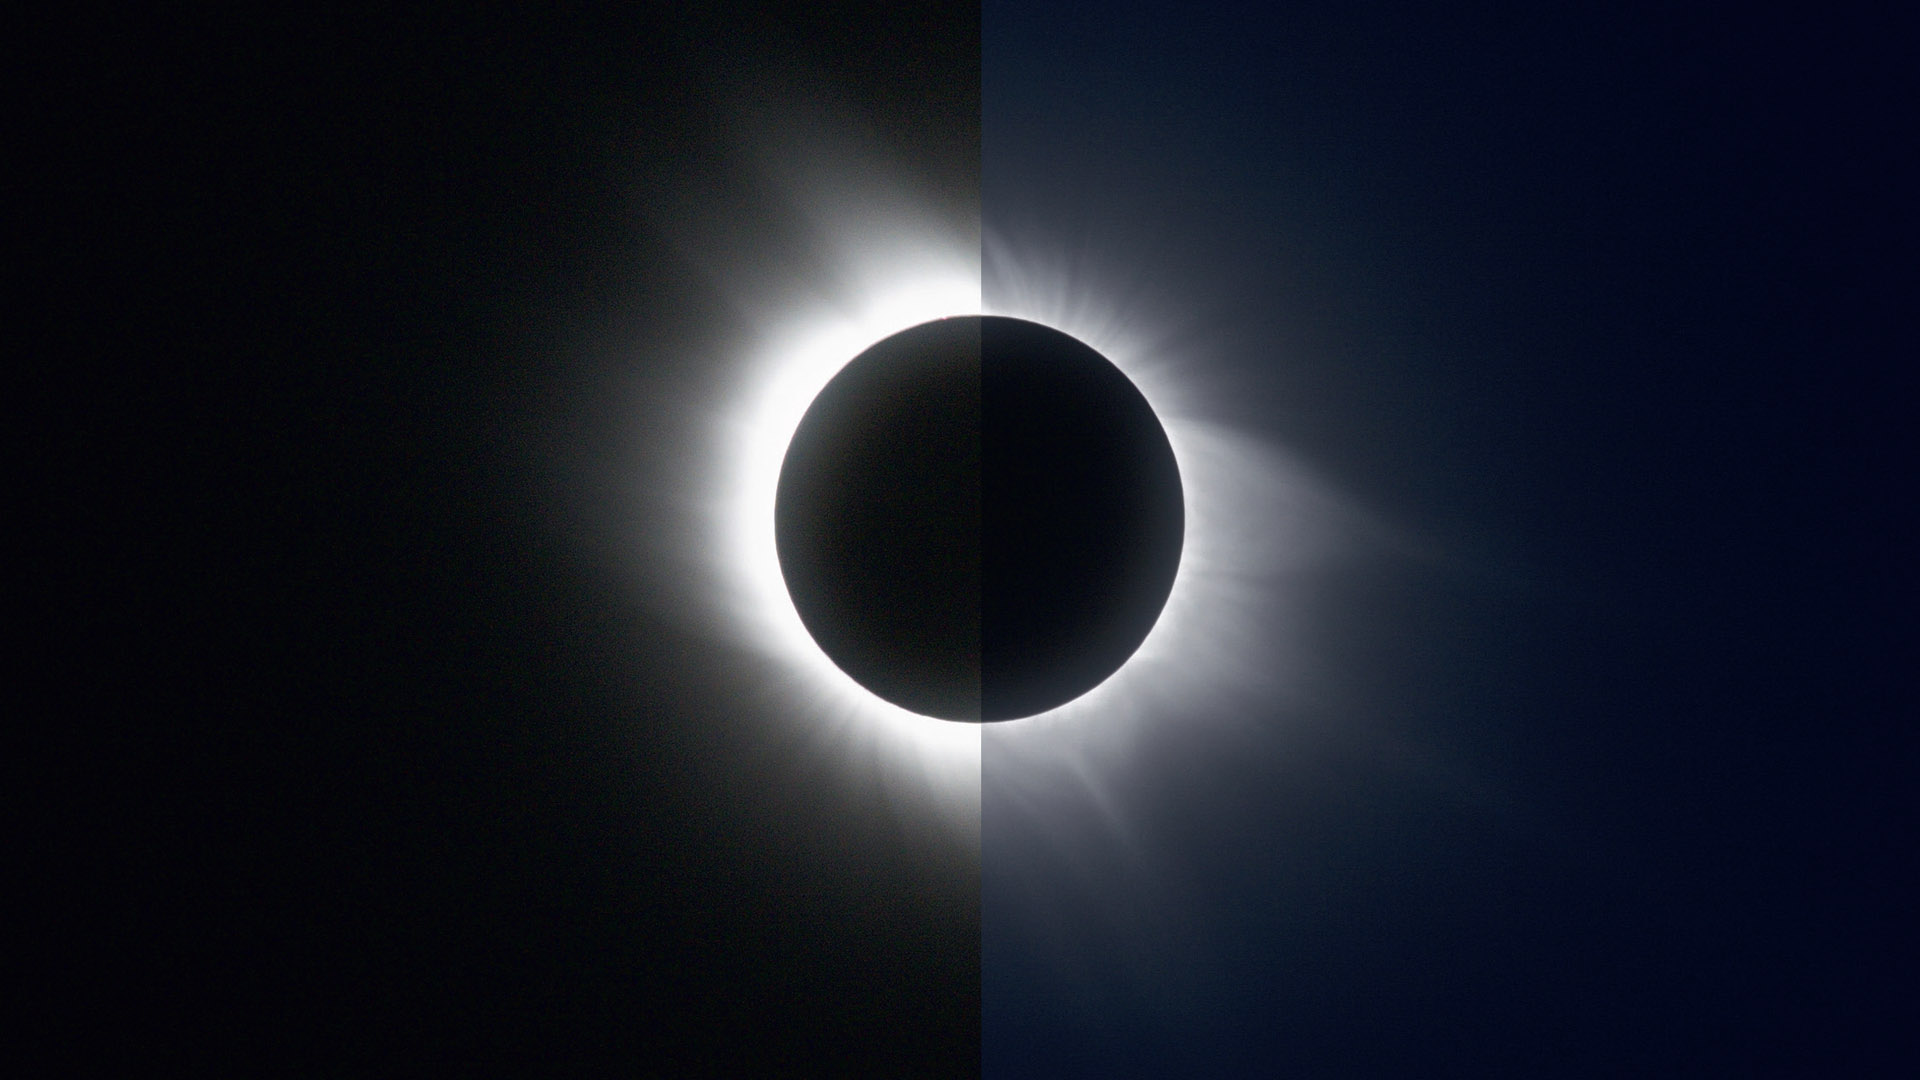 Two views of the 2006 total solar eclipse: on the left a single image with 1/8s exposure time and on the right an HDR composite of images with exposure times of 1/8s to 1/1000s. M.Weigand